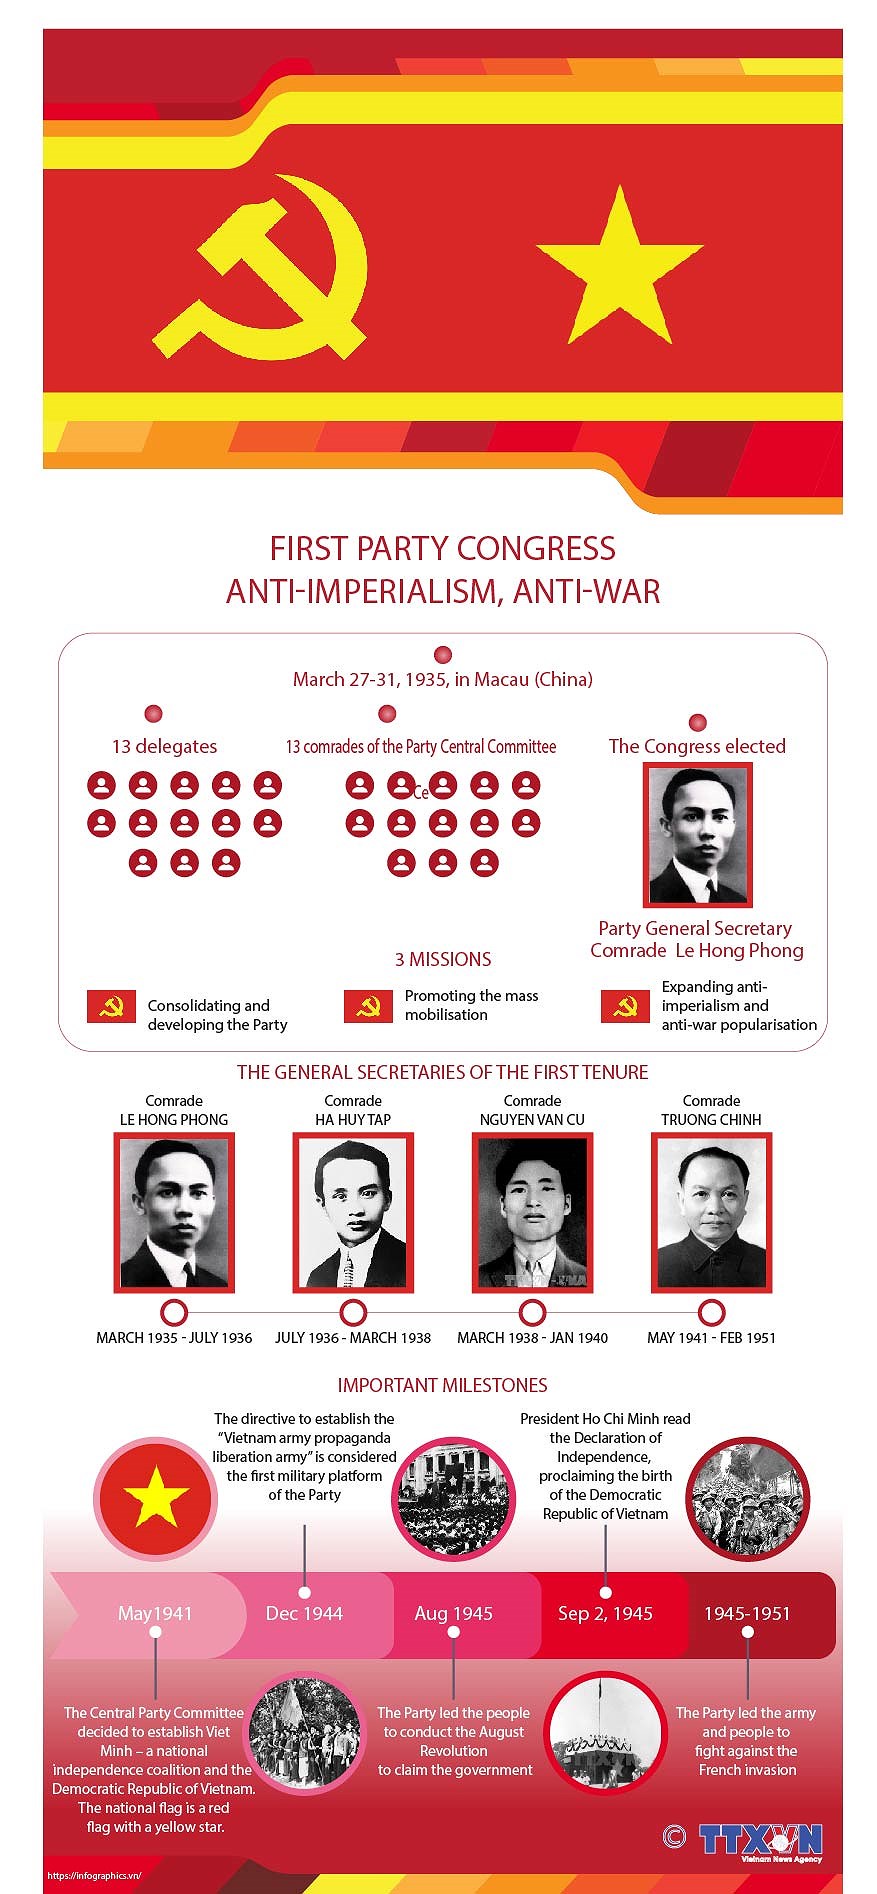 First Party Congress: anti-imperialism, anti-war hinh anh 1